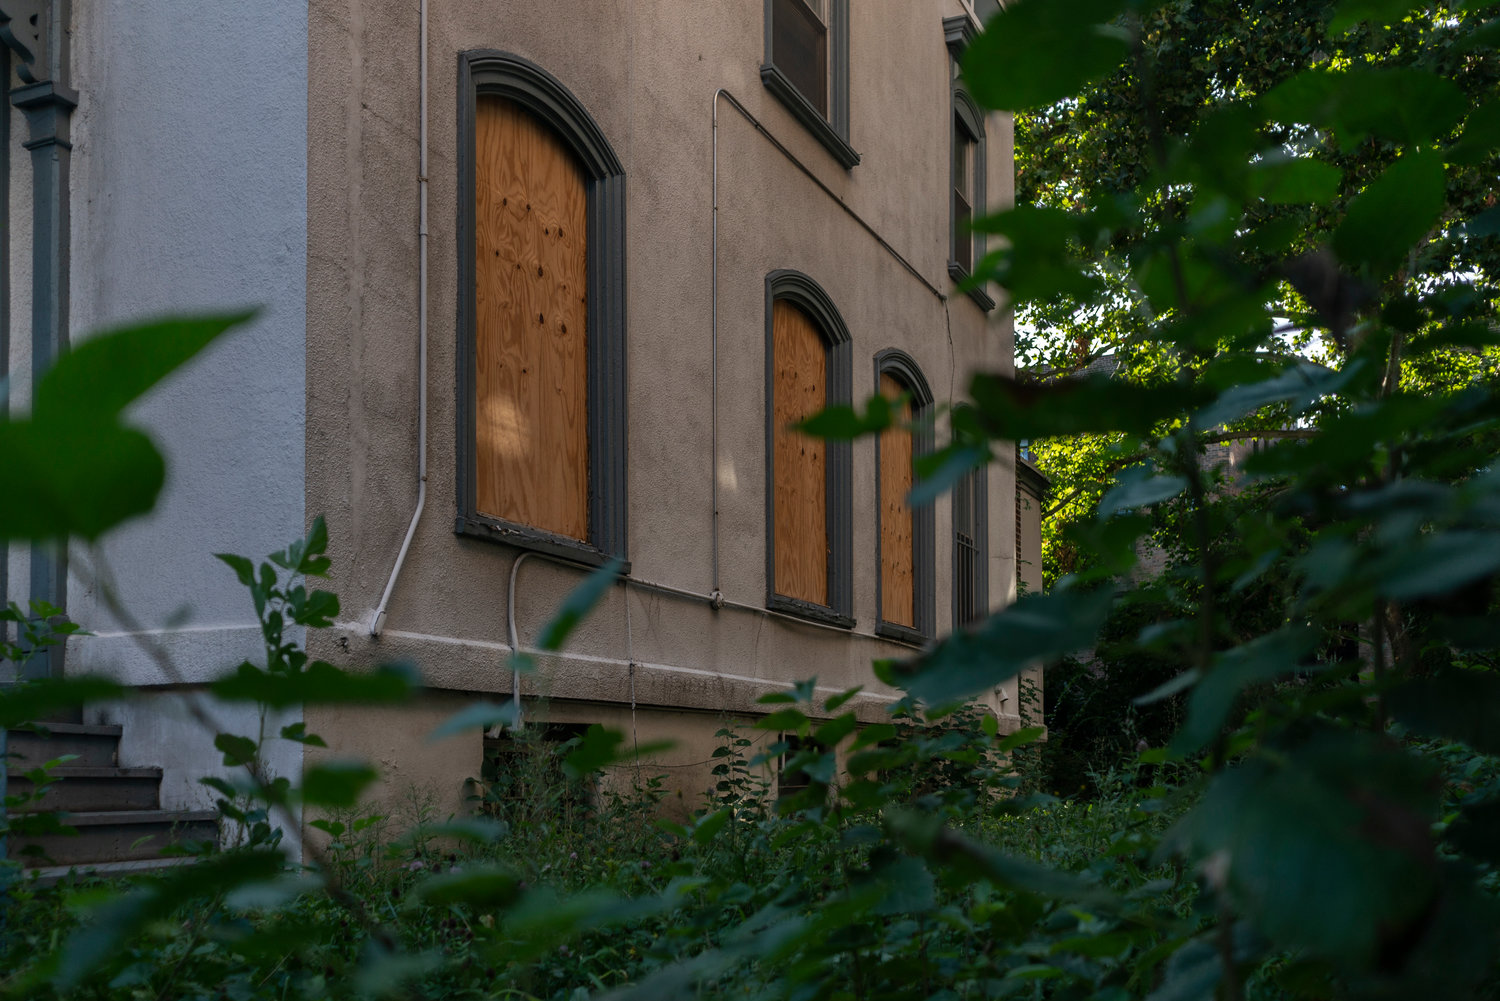 Over the lowest points of the stone walls surrounding the Moller Mansion, passersby can see some of the boarded-up windows of the longtime convent at 3029 Godwin Terrace.